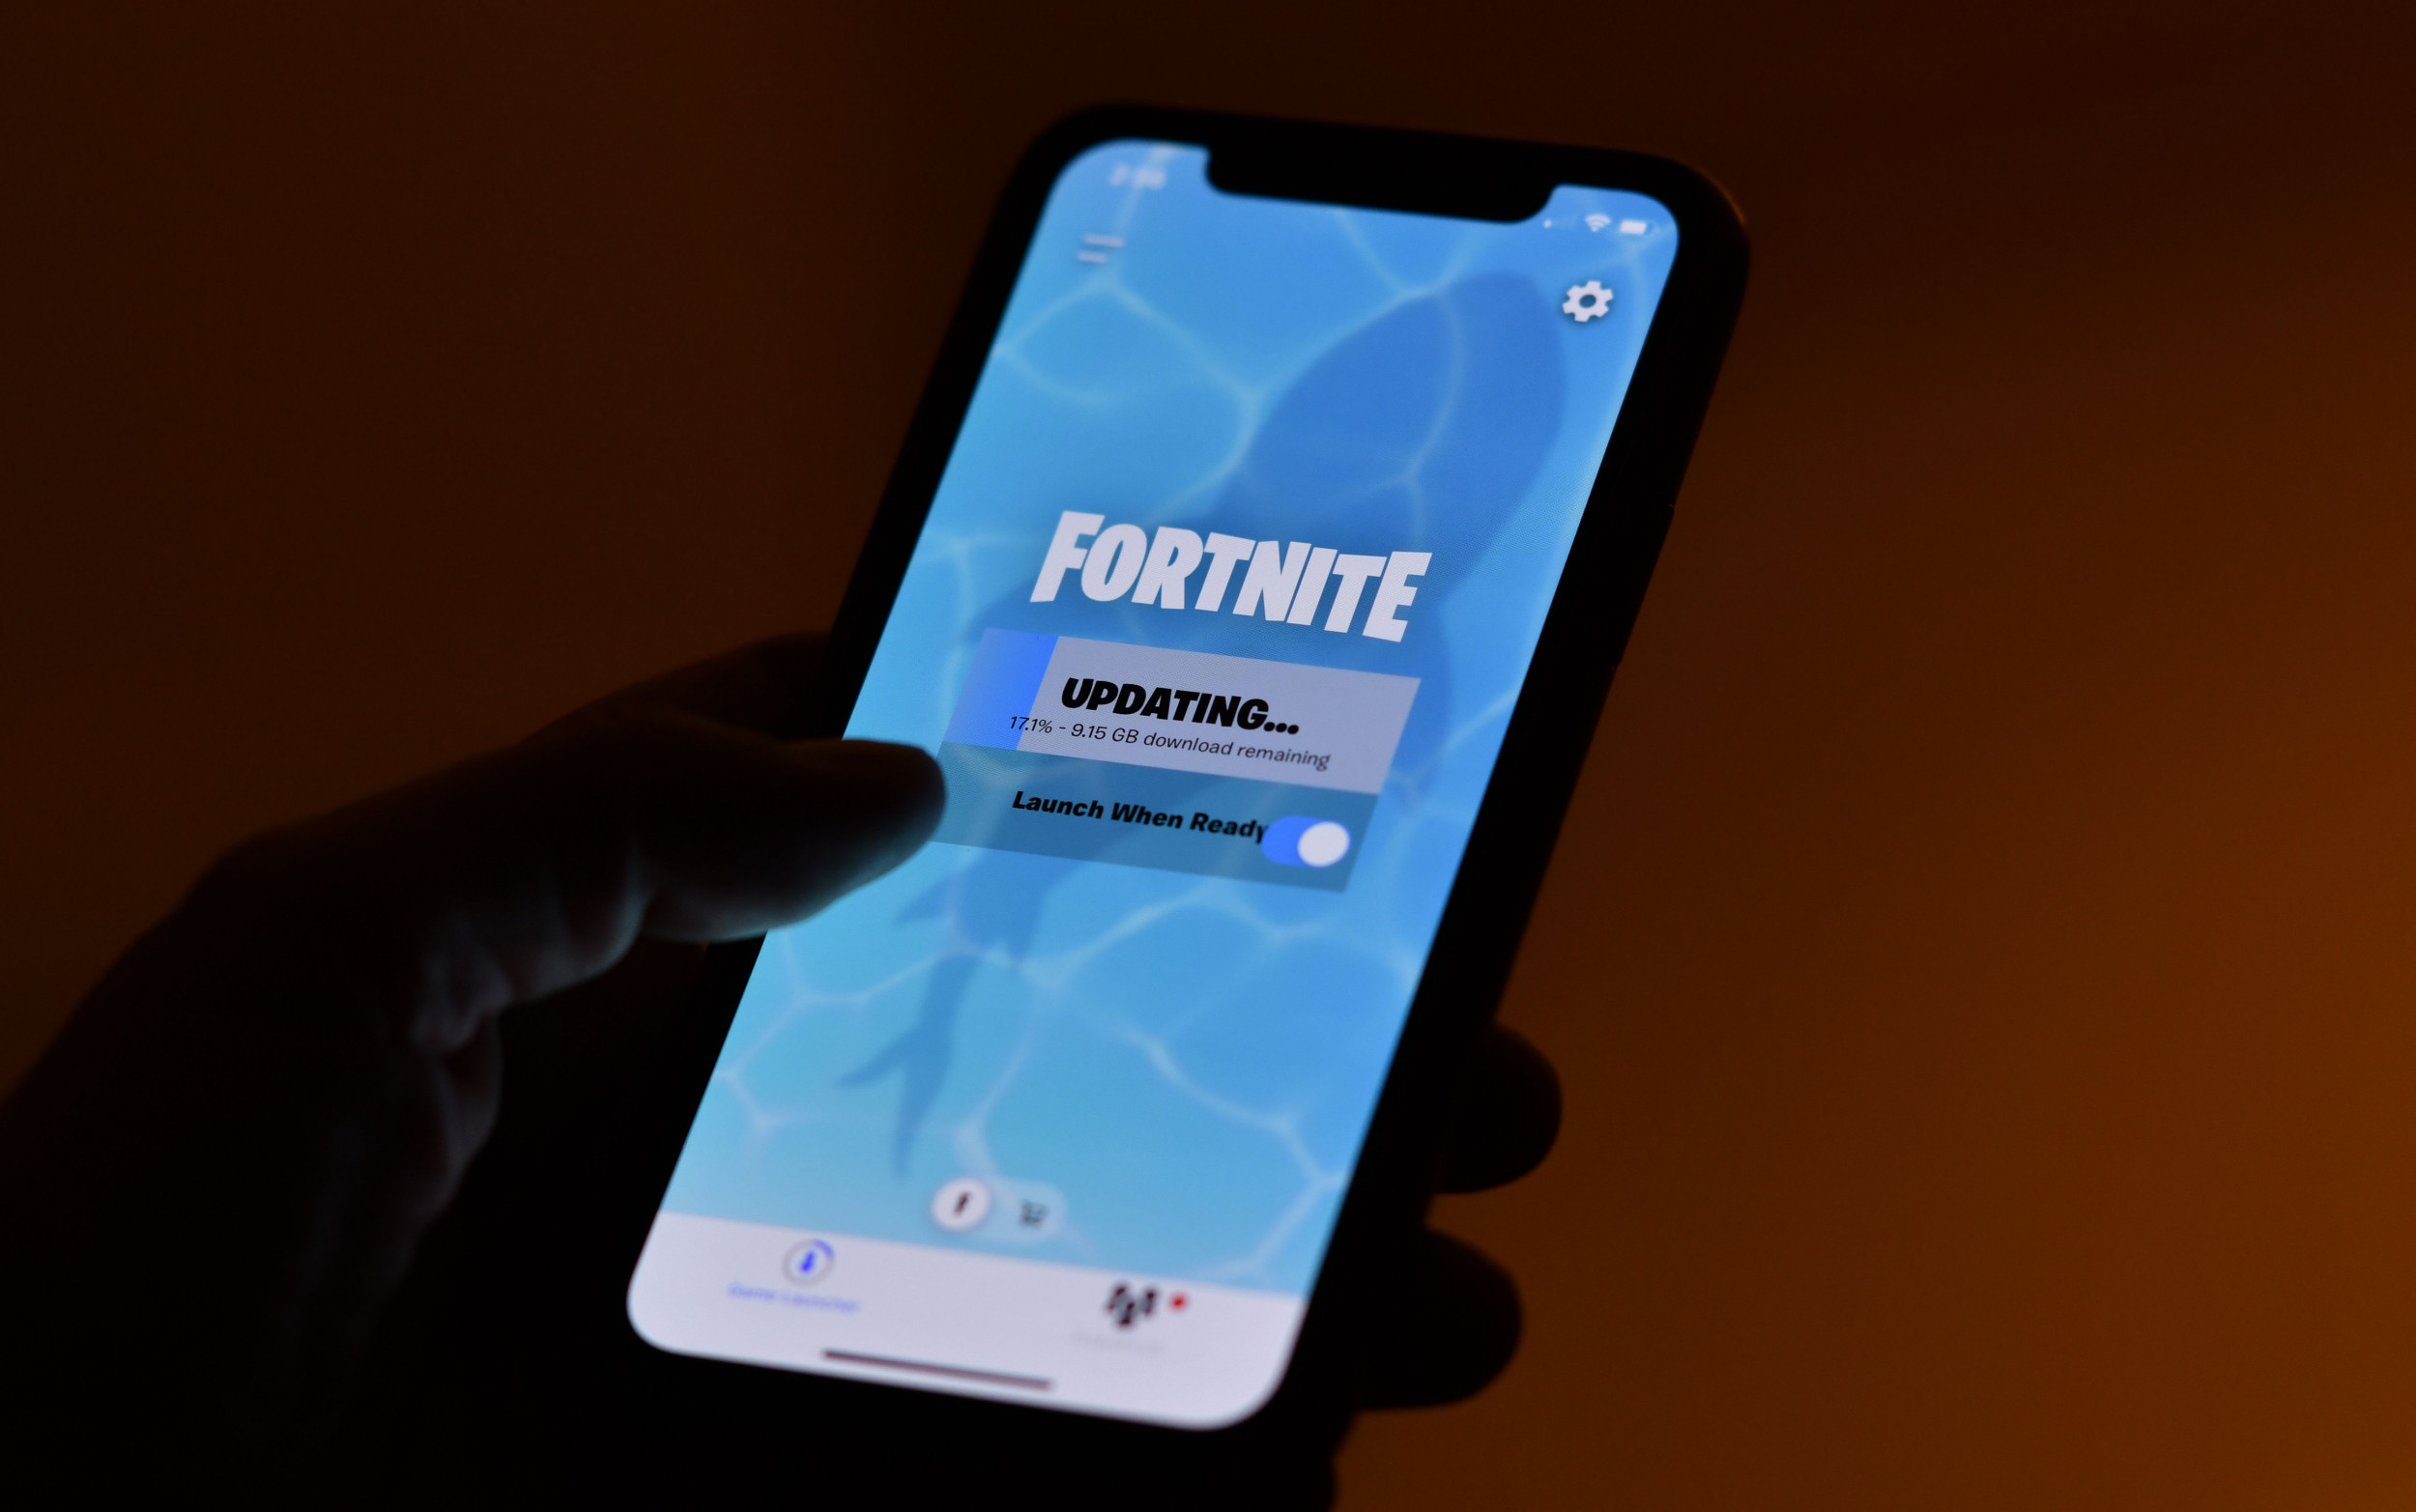 Fortnite Server Eta March 6th Fortnite Servers In Downtime Ahead Of Season 6 Start How To Check When They Will Be Back Up